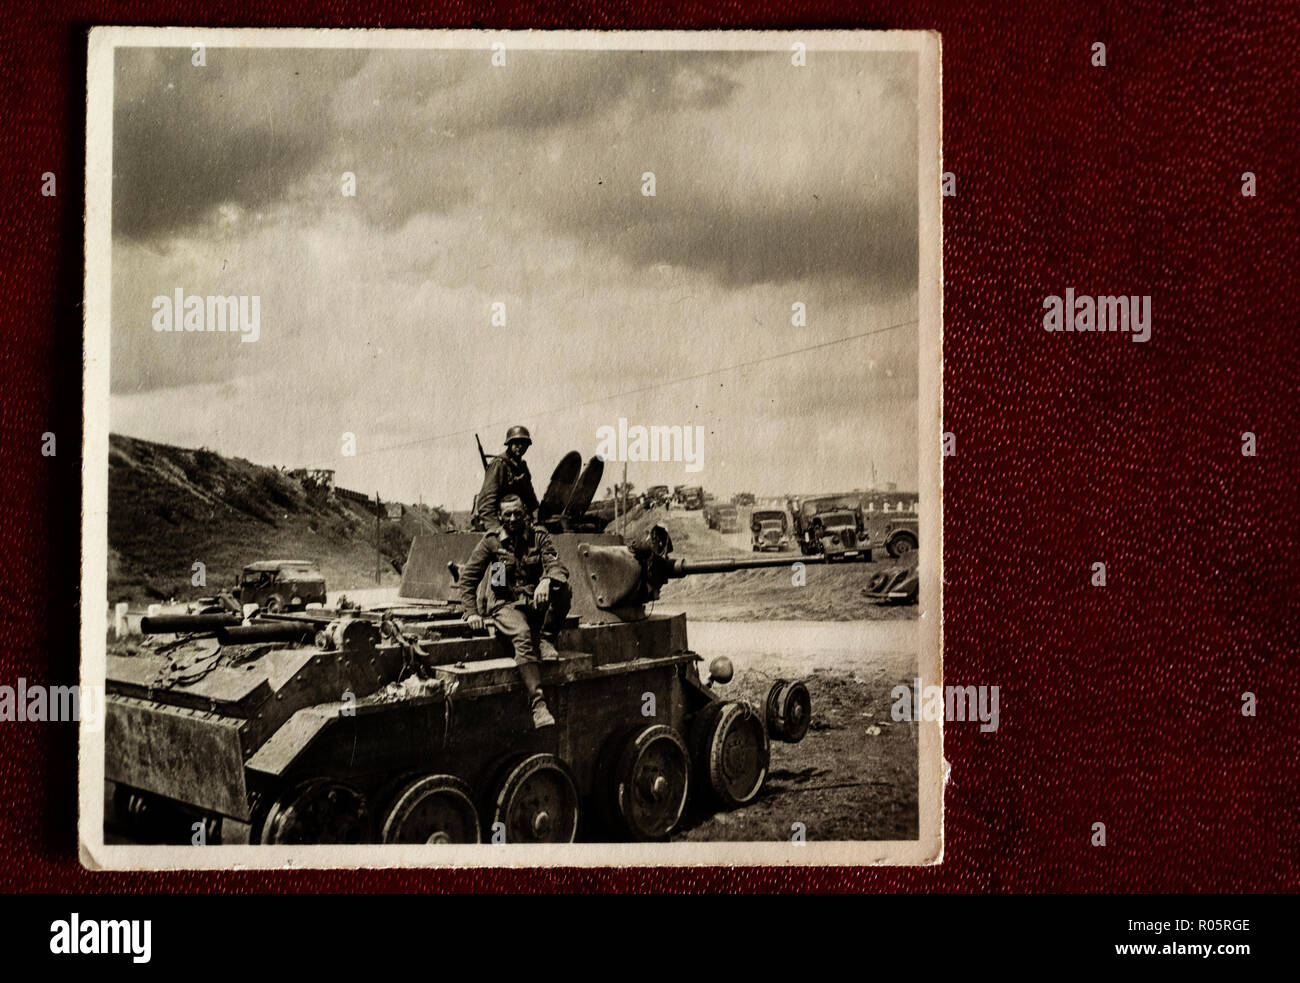 German soldiers pose for a padded tank of 52 brigades of the Red Army, Ukraine, July 1, 1941. Photo from a family photo album bought at a flea market. Stock Photo